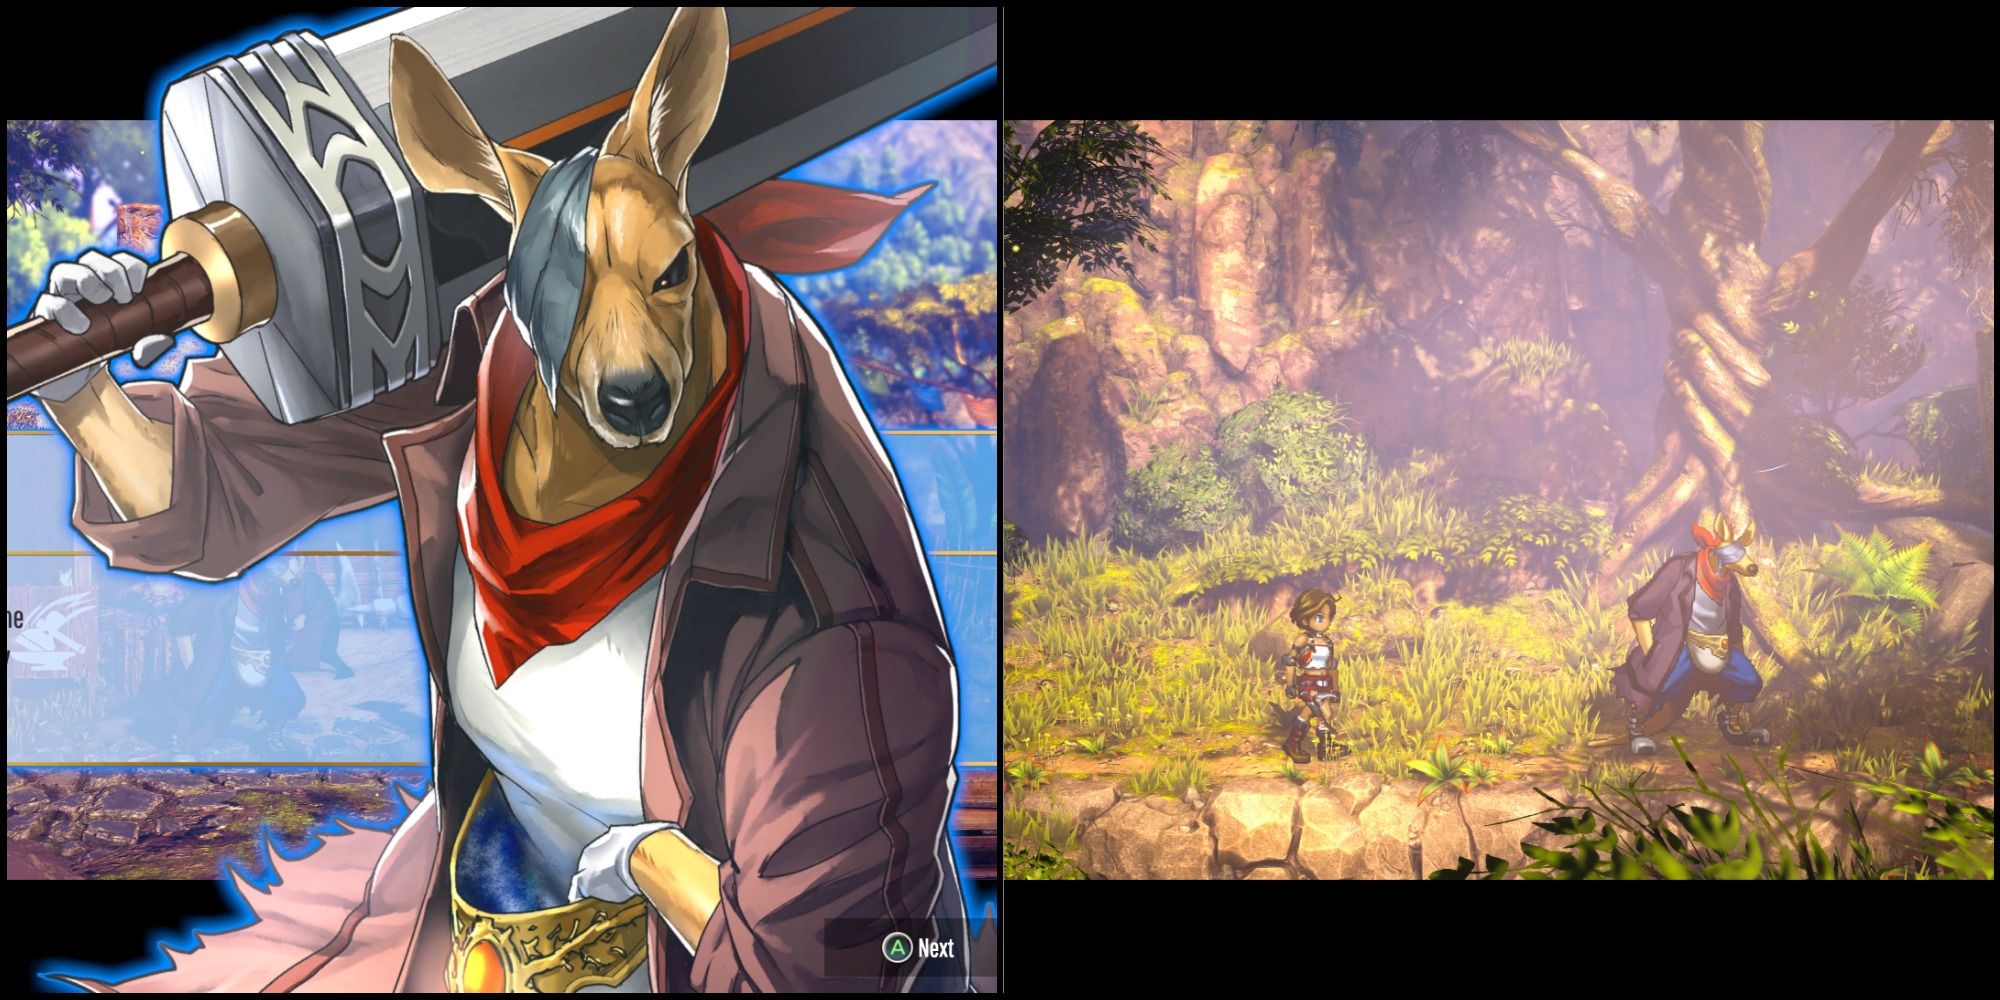 A split image of Garoo's character screen and CJ meeting him for the first time.